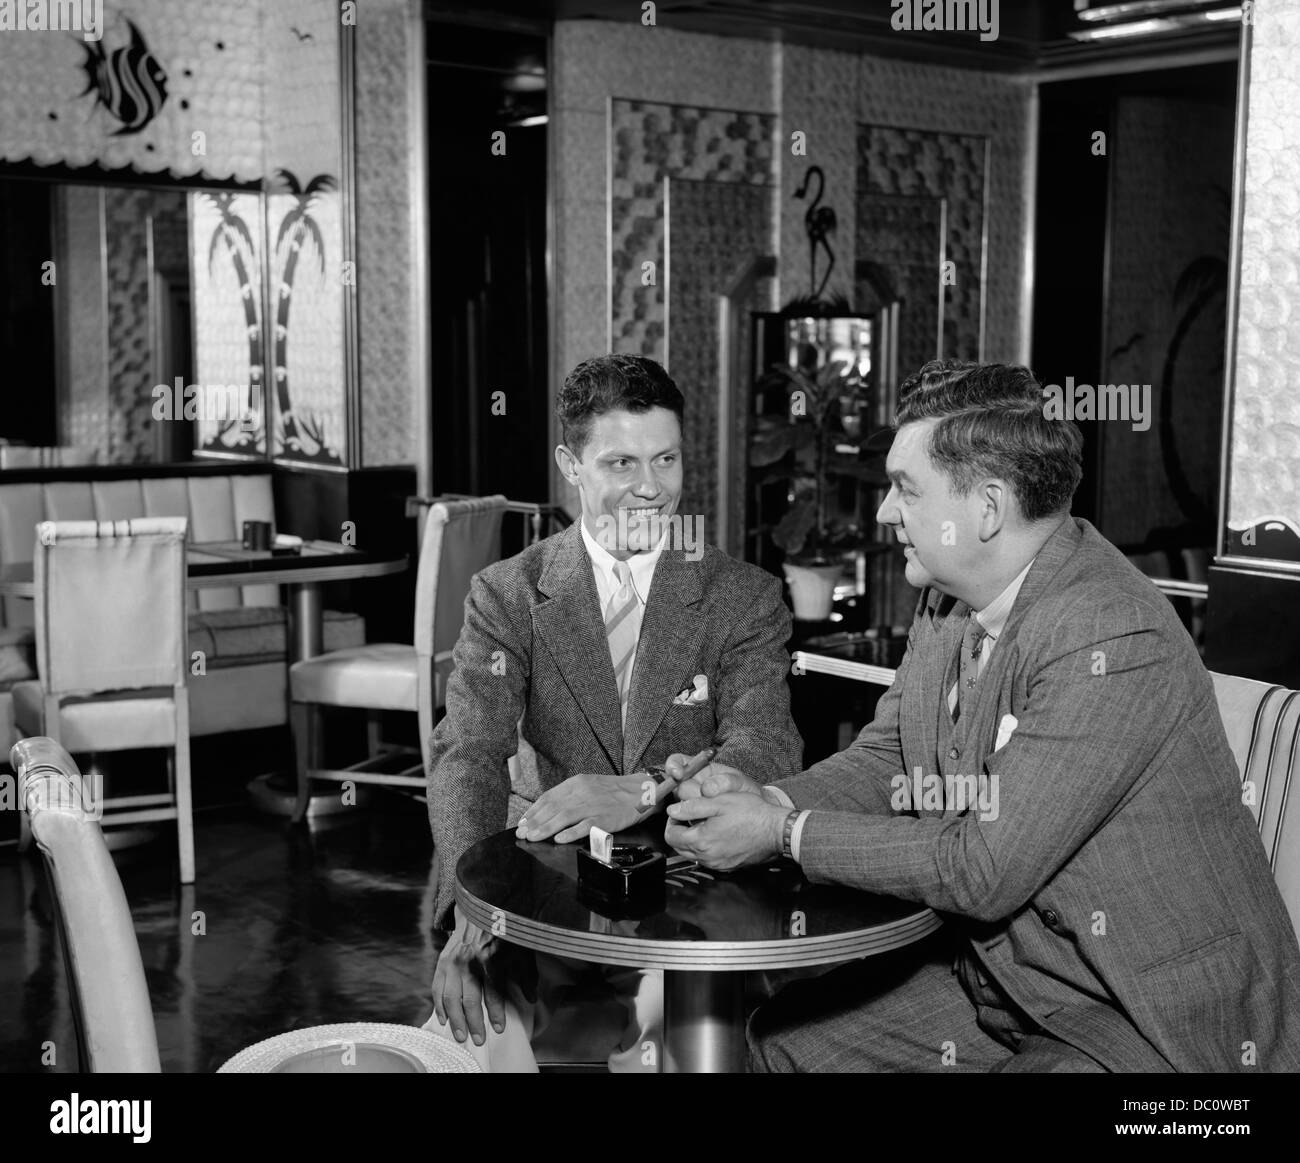 1930s 1940s TWO SMILING MEN FRIENDS SITTING TOGETHER AT TABLE IN NIGHTCLUB TALKING SMOKING CIGAR Stock Photo